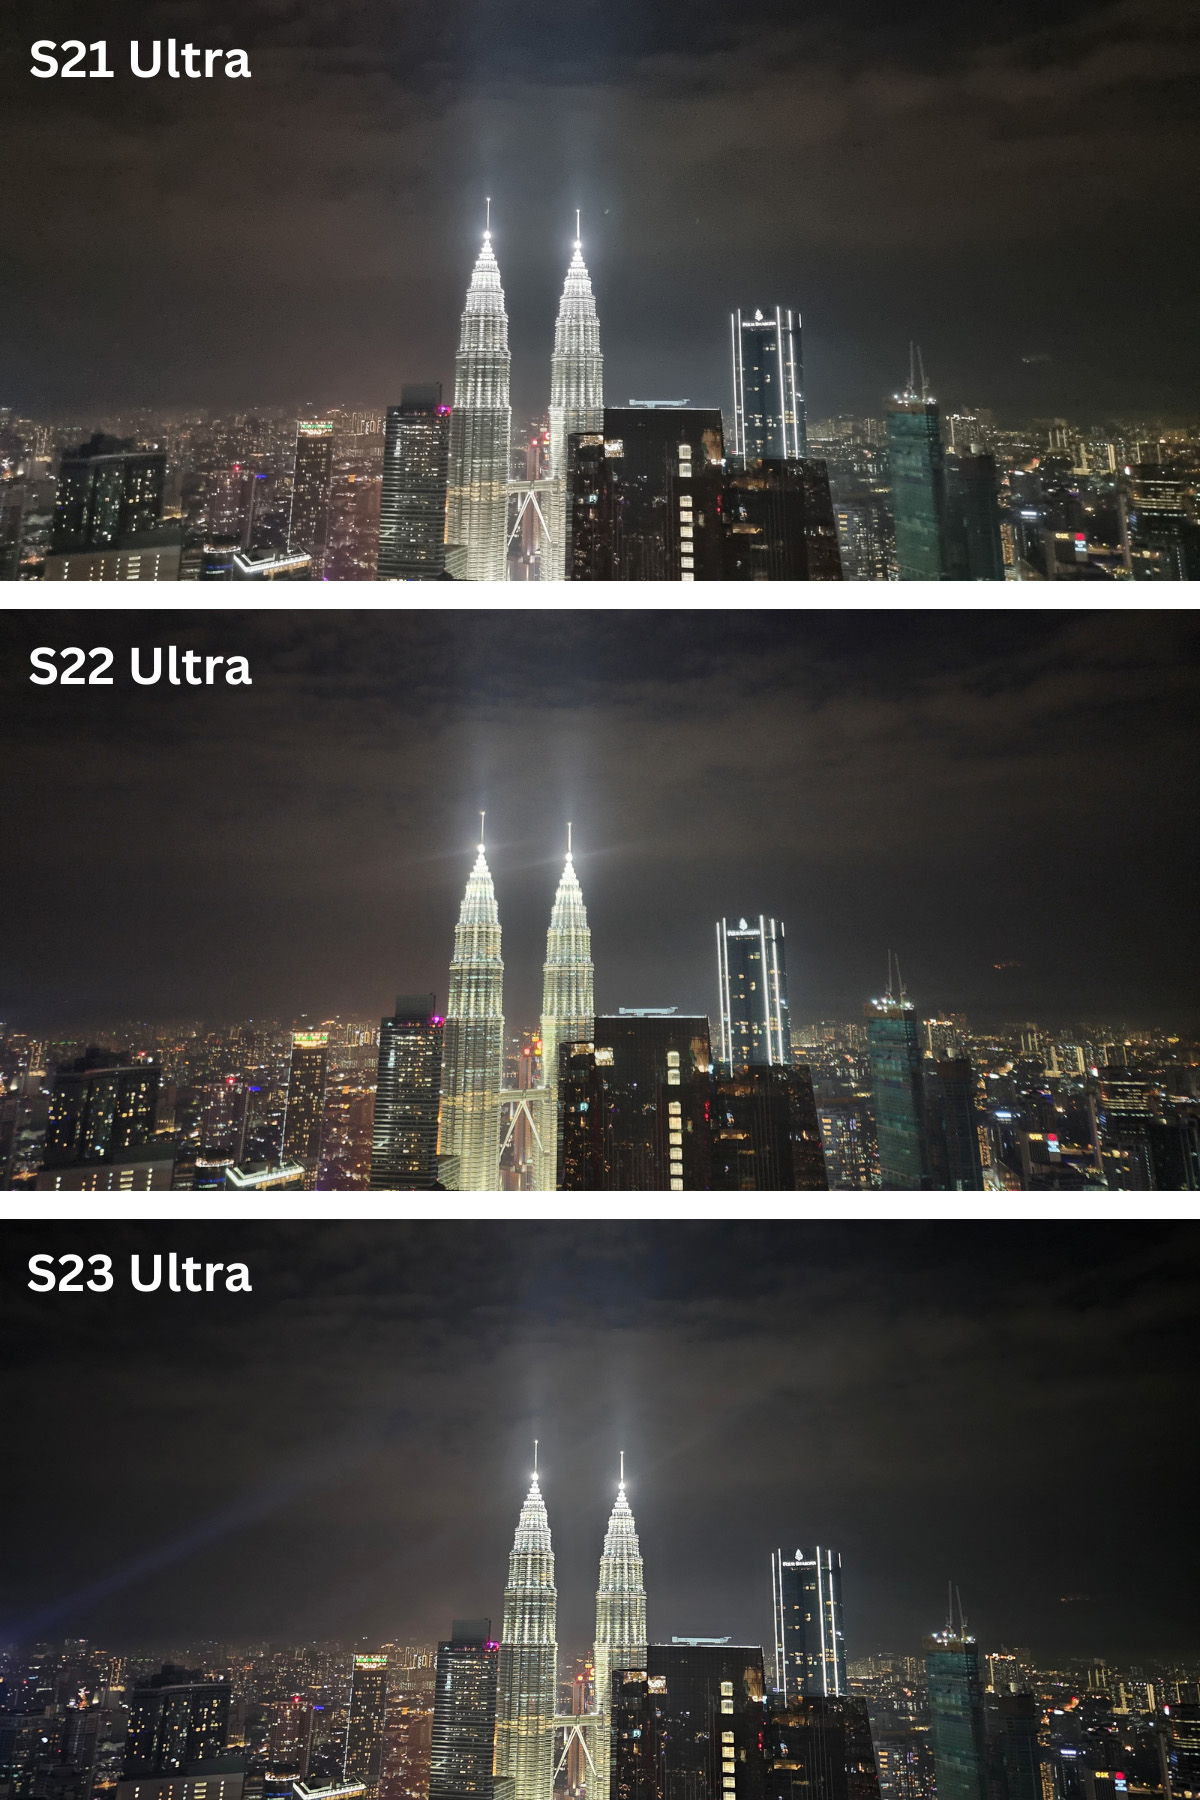 Samsung Galaxy S23 Ultra: The Power Of 200 Megapixels Unleashed